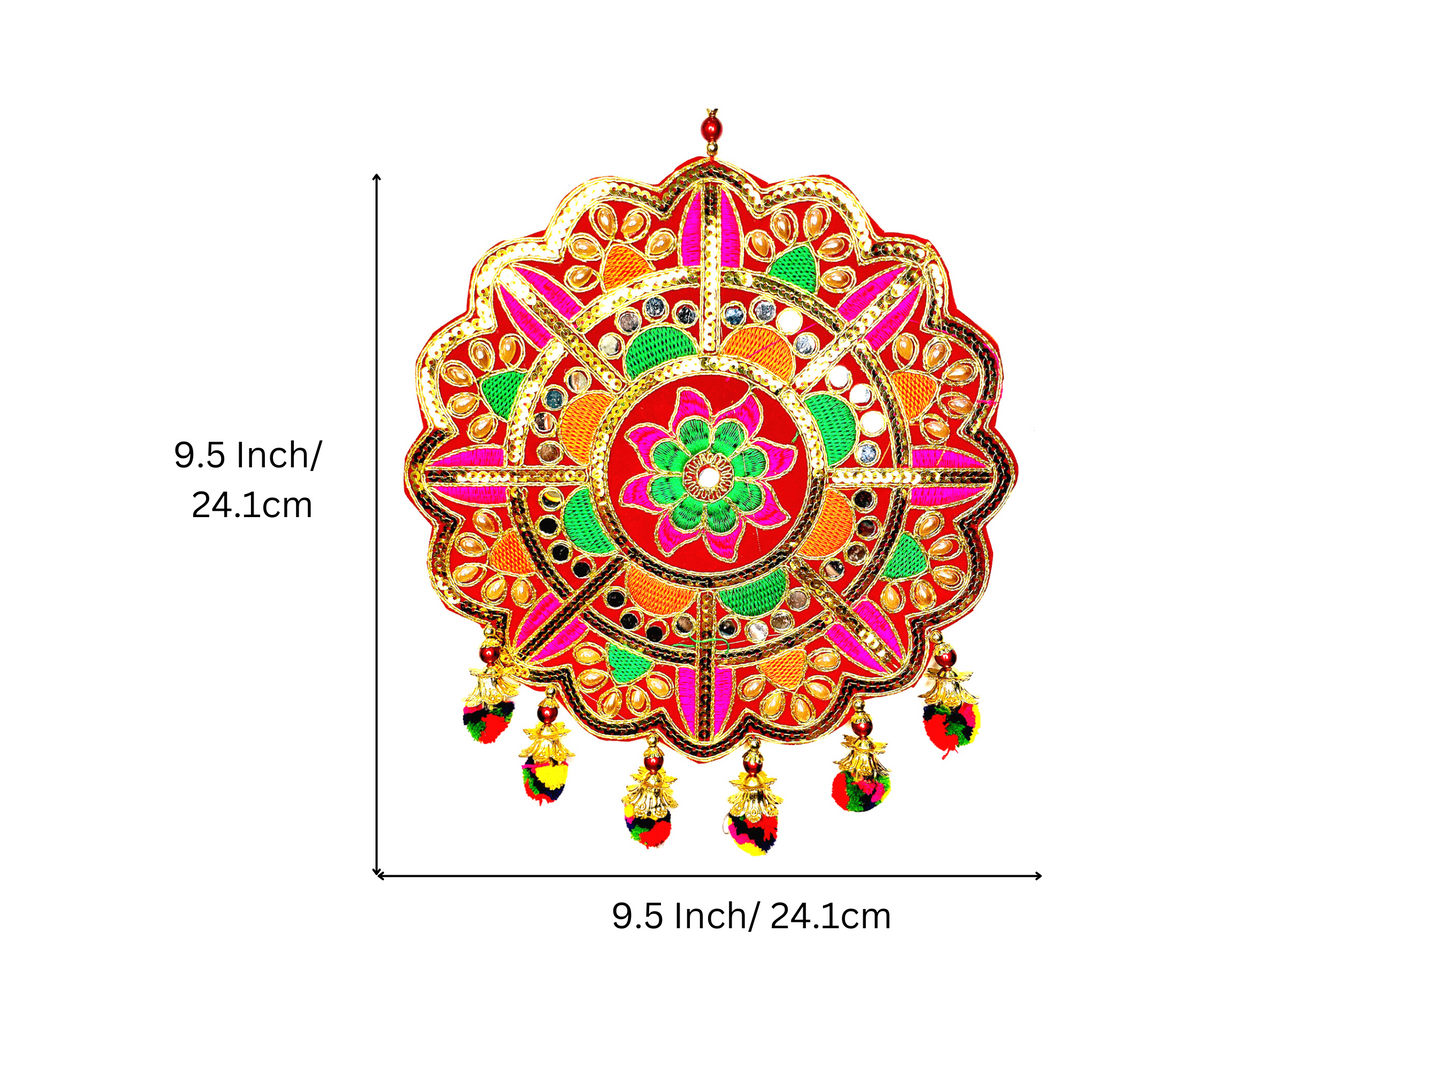 Lotus Flower Rangoli with Tassels and Mirror work Colorful Wall hangings Pooja Festive Home door decoration